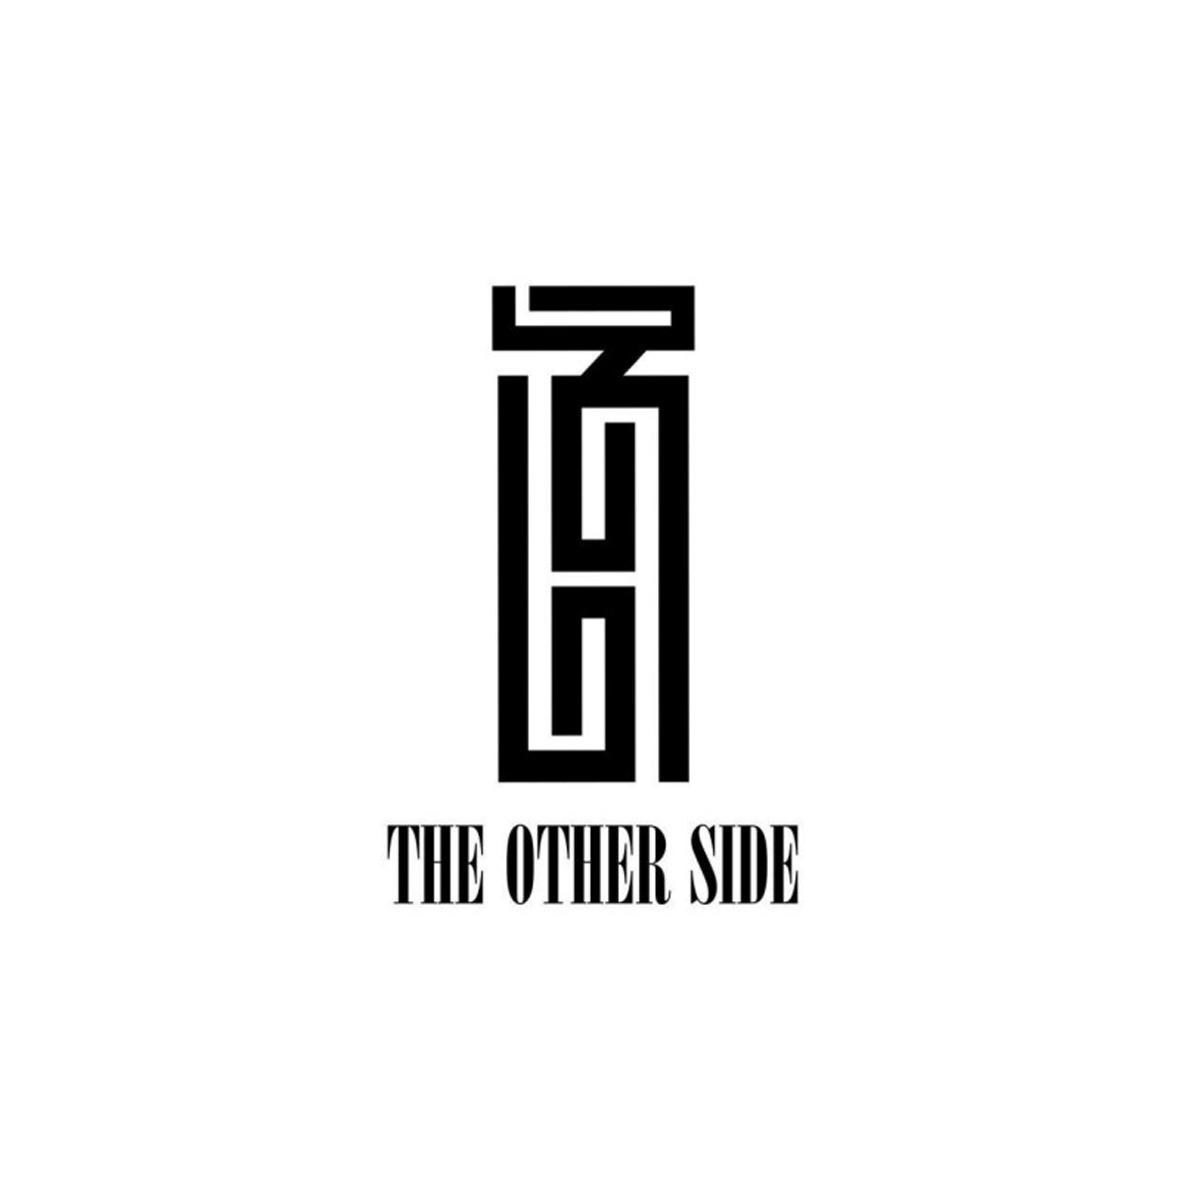 THE OTHER SIDE商标转让